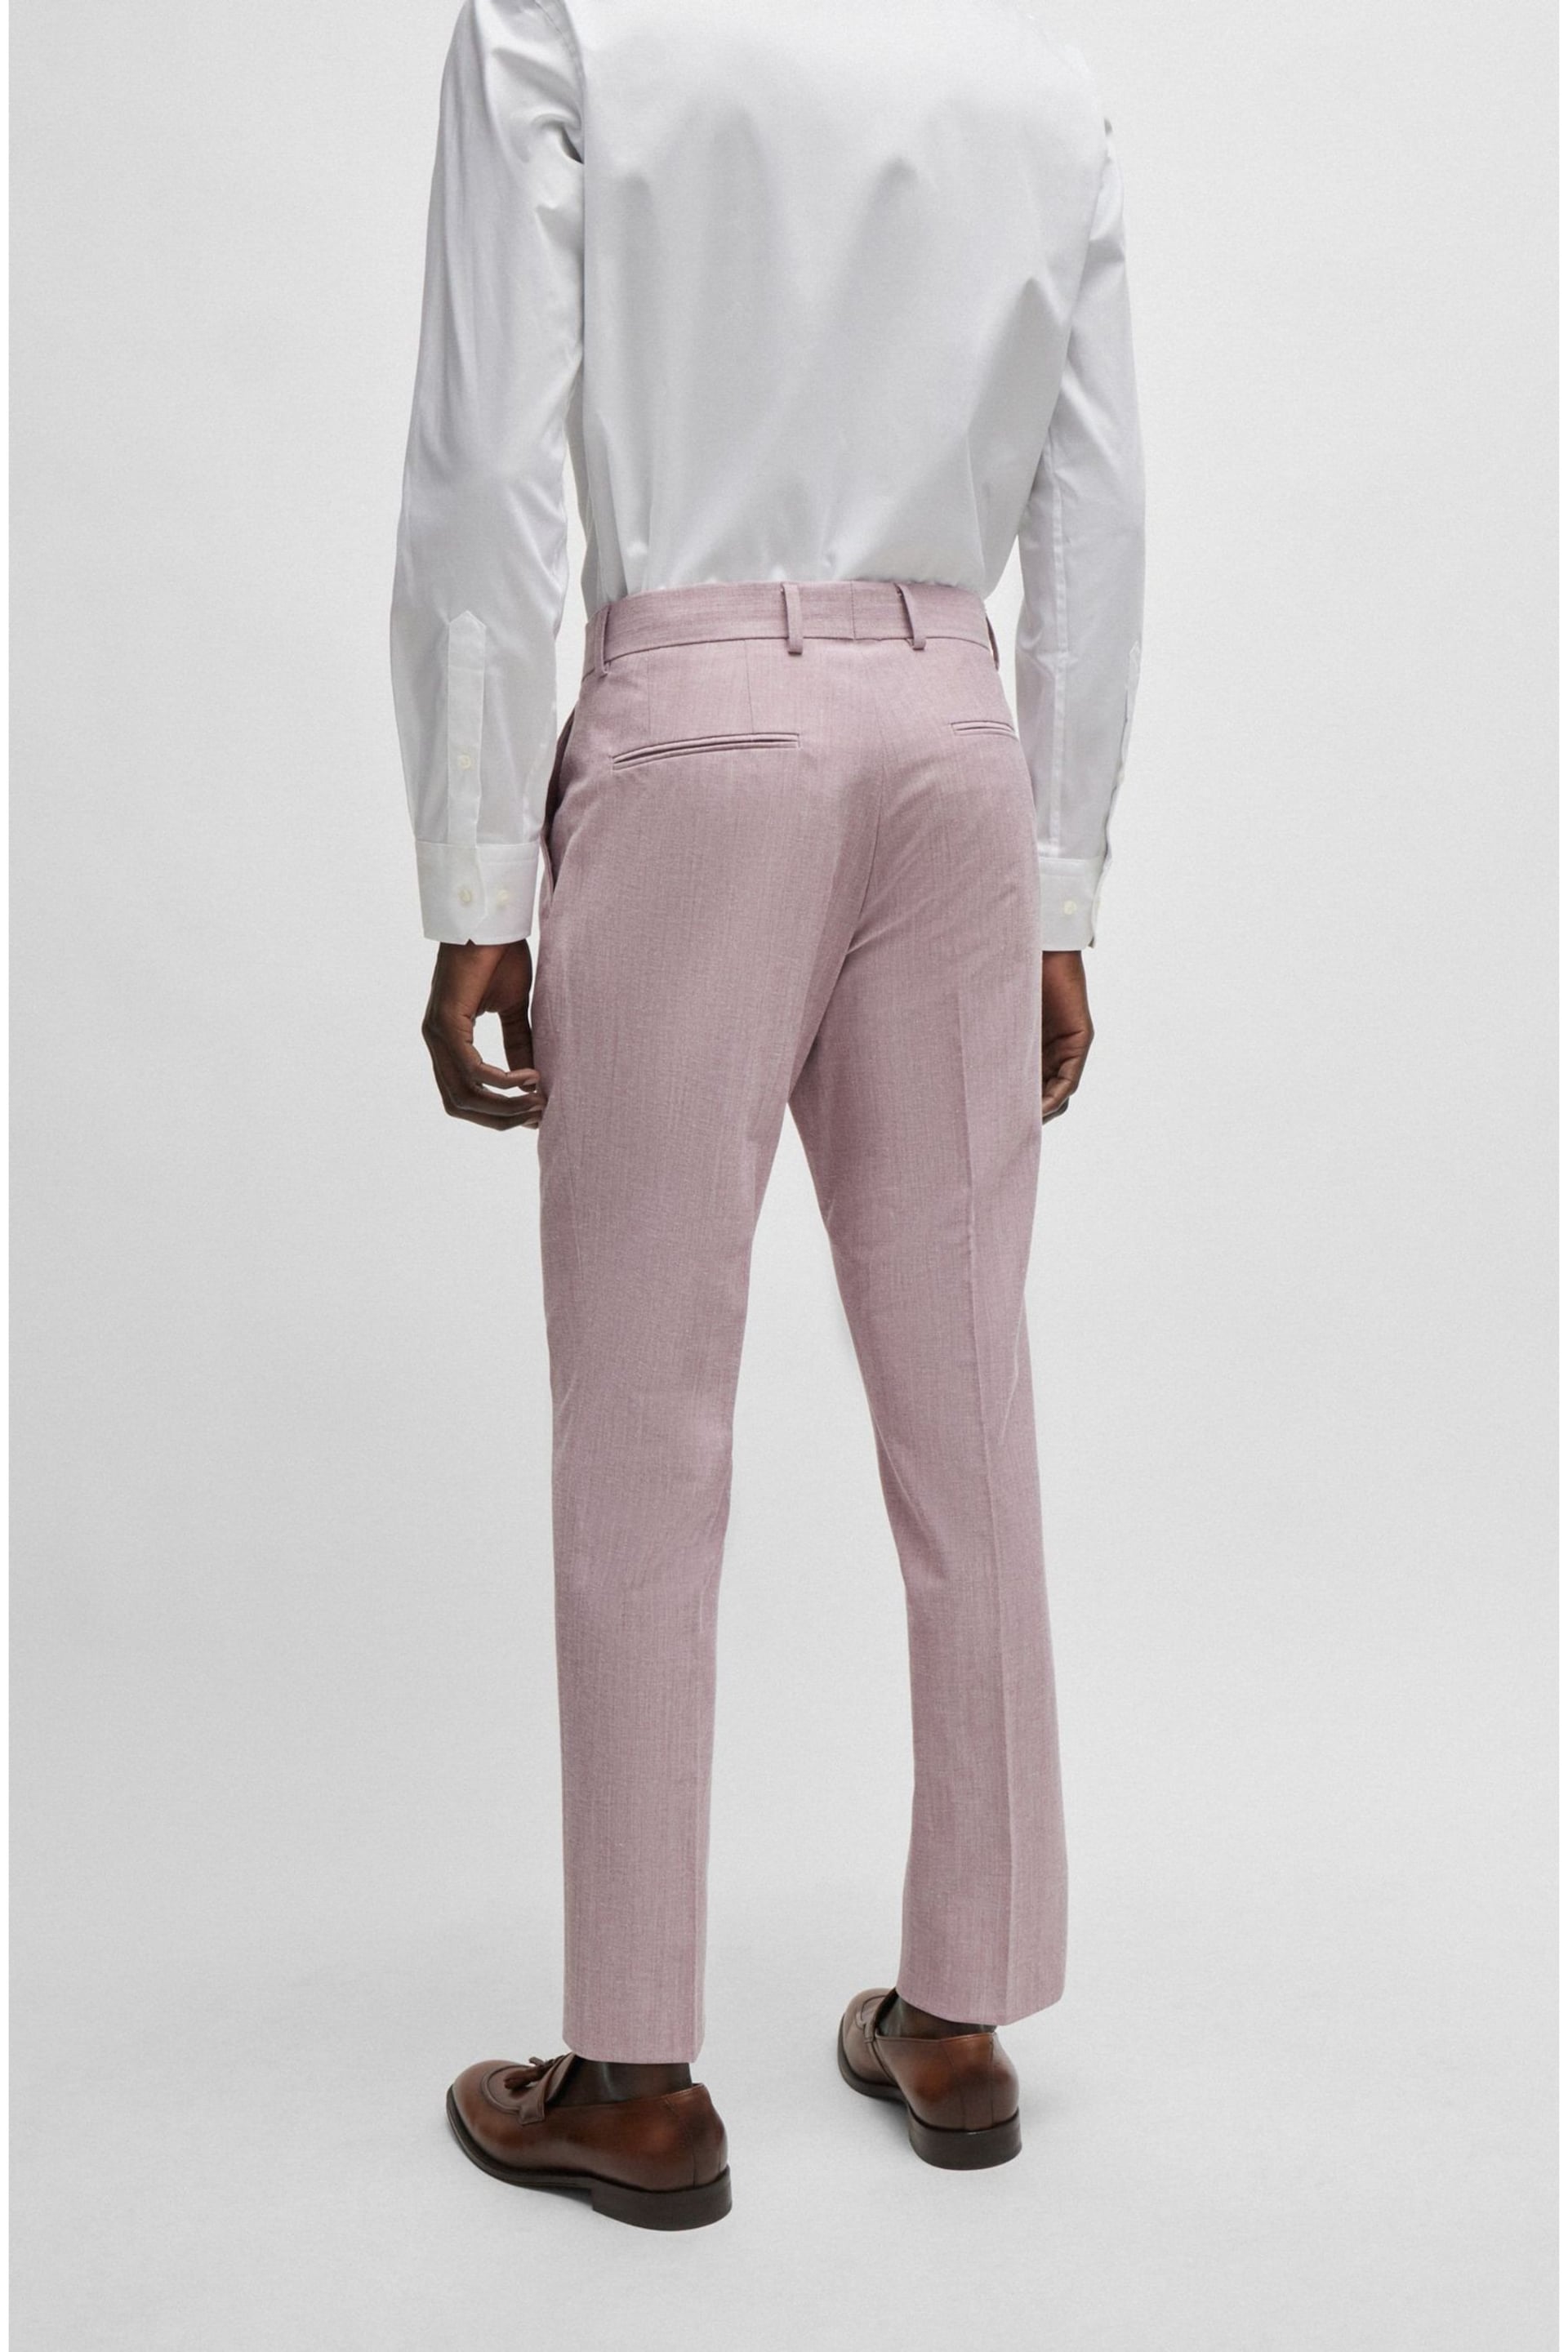 BOSS Pink Slim-Fit Trousers In A Micro-Patterned Cotton Blend - Image 2 of 5